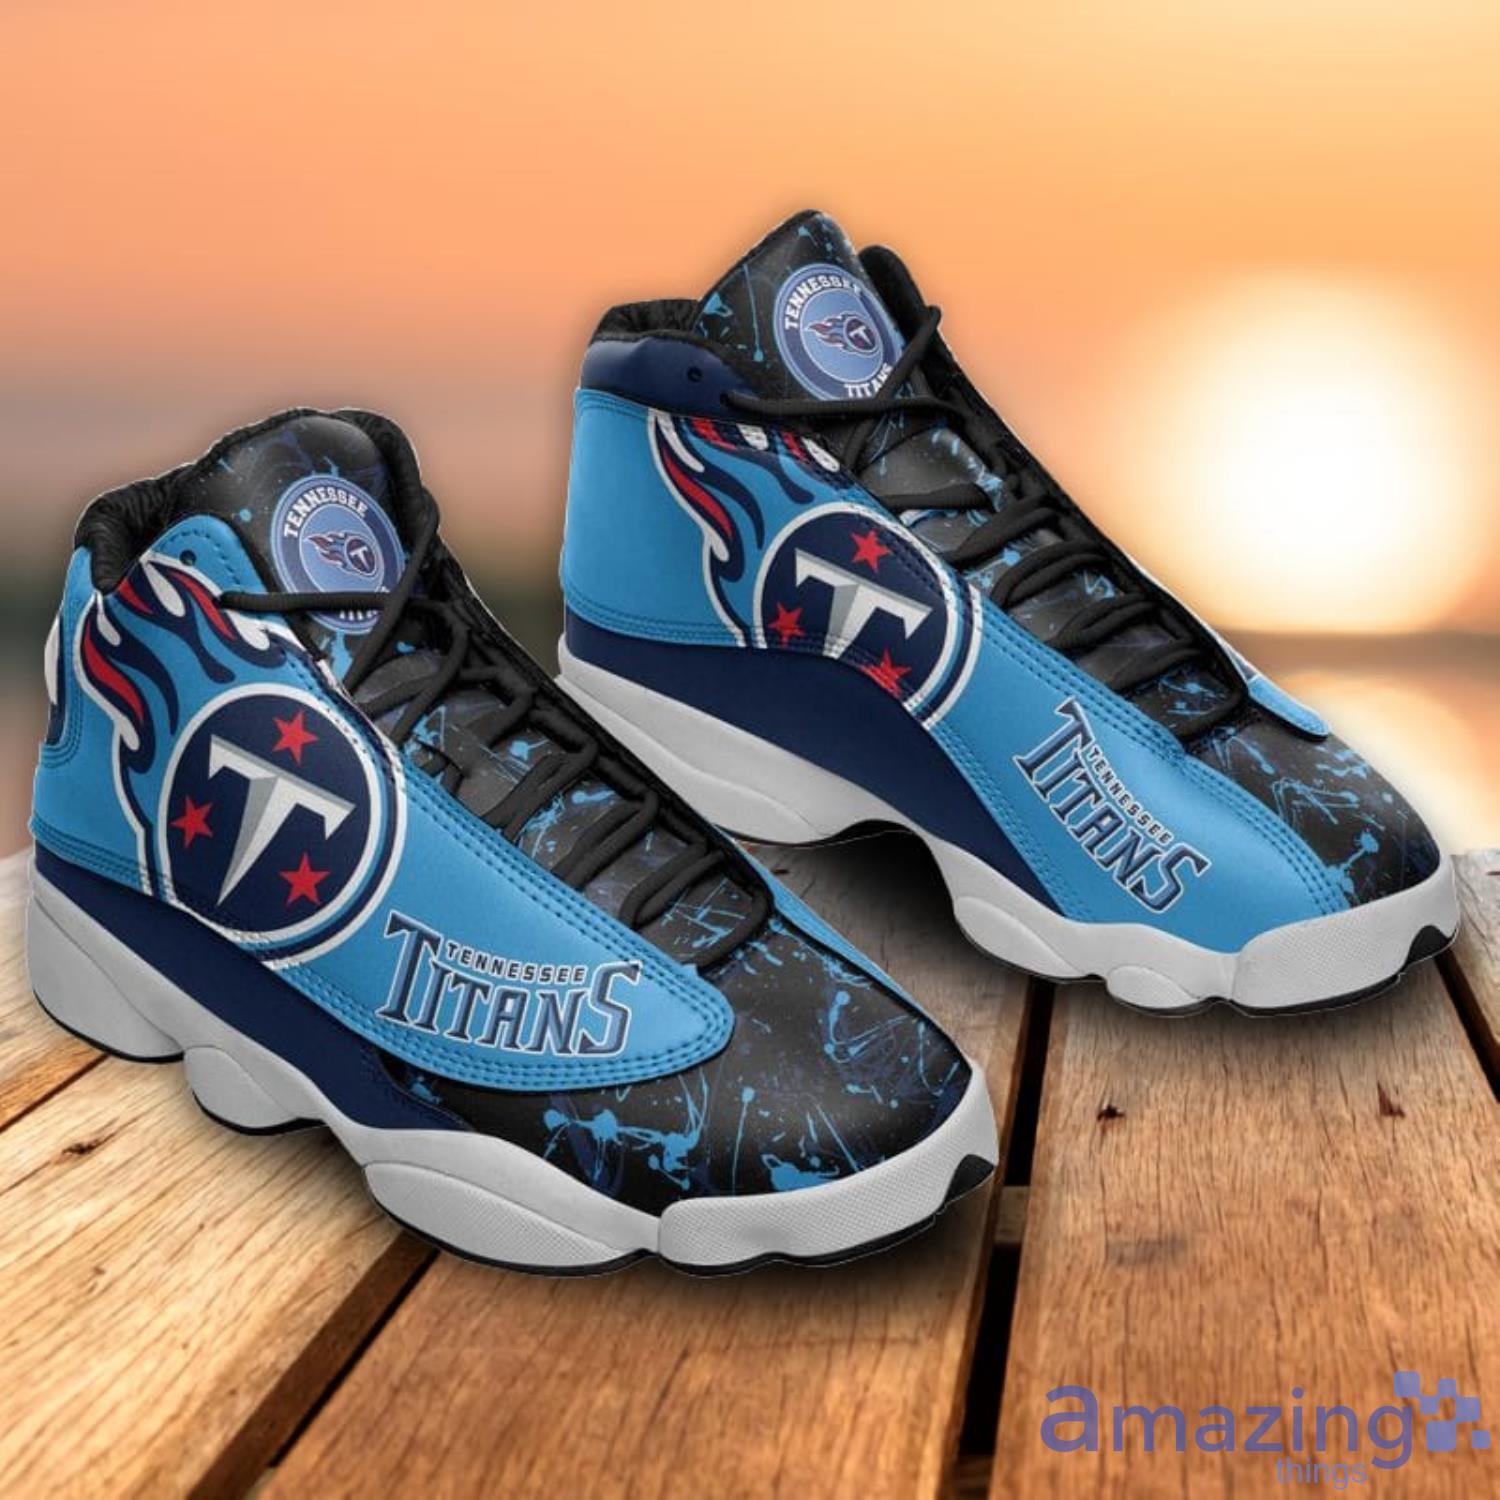 tennessee titans slippers